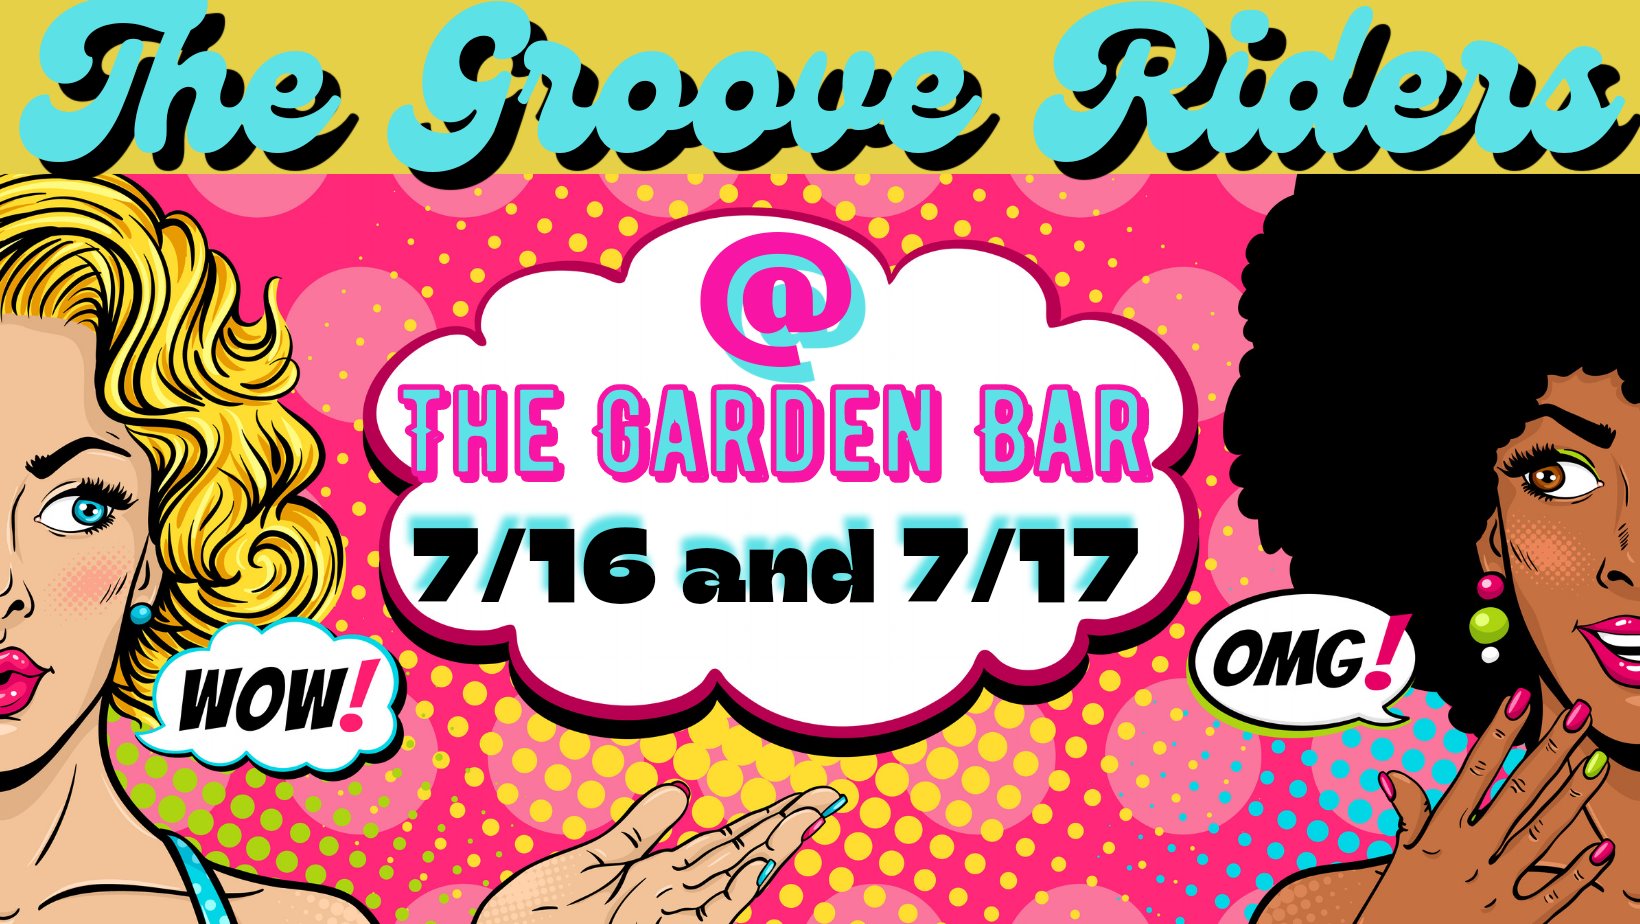 The Groove Riders at the Garden Bar